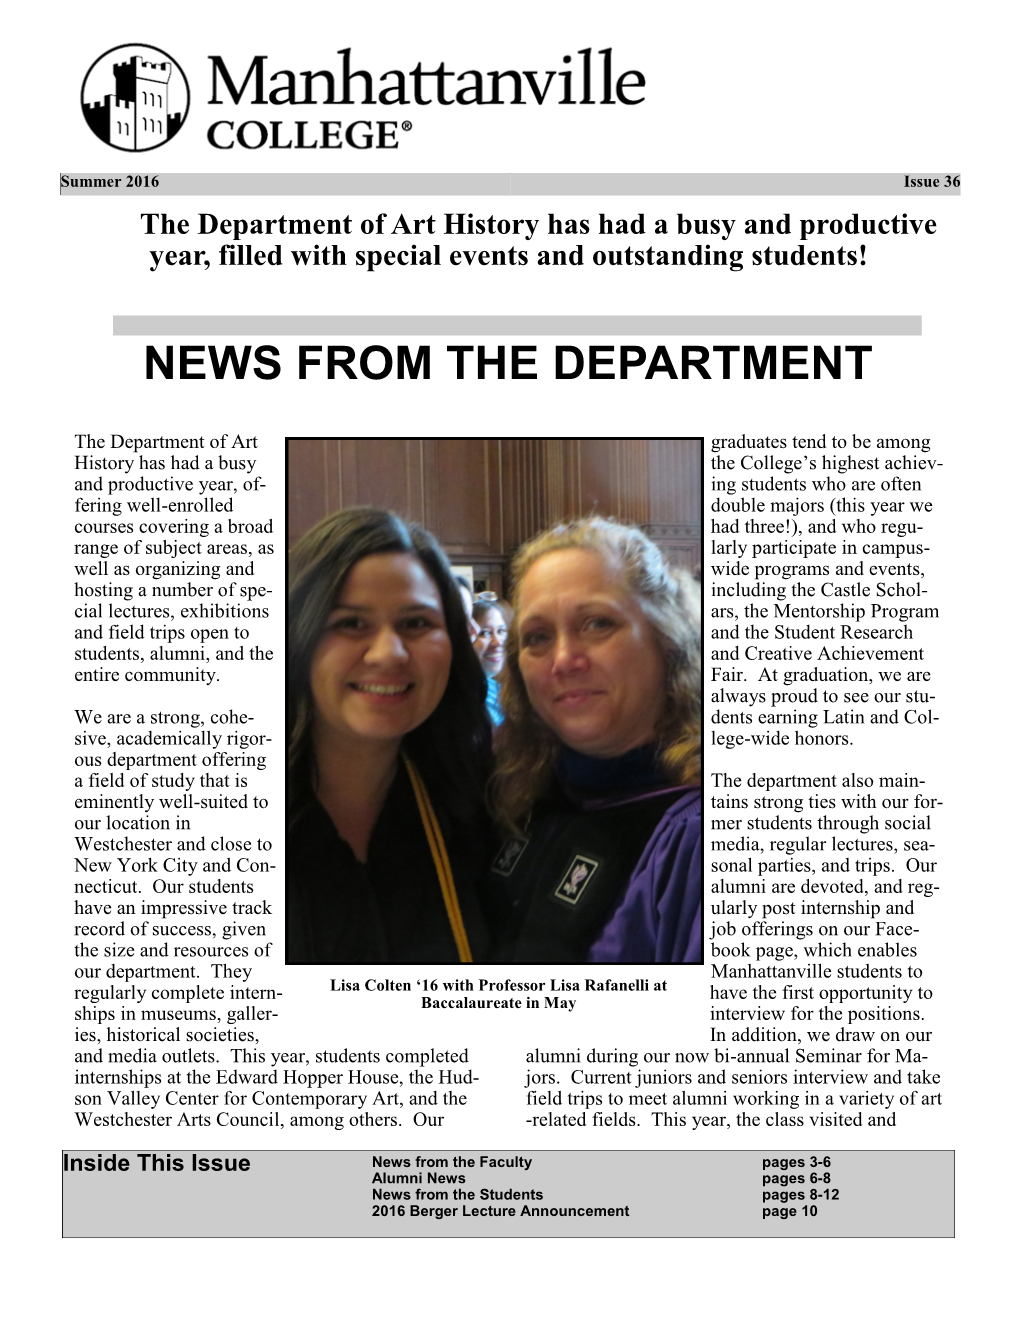 News from the Department